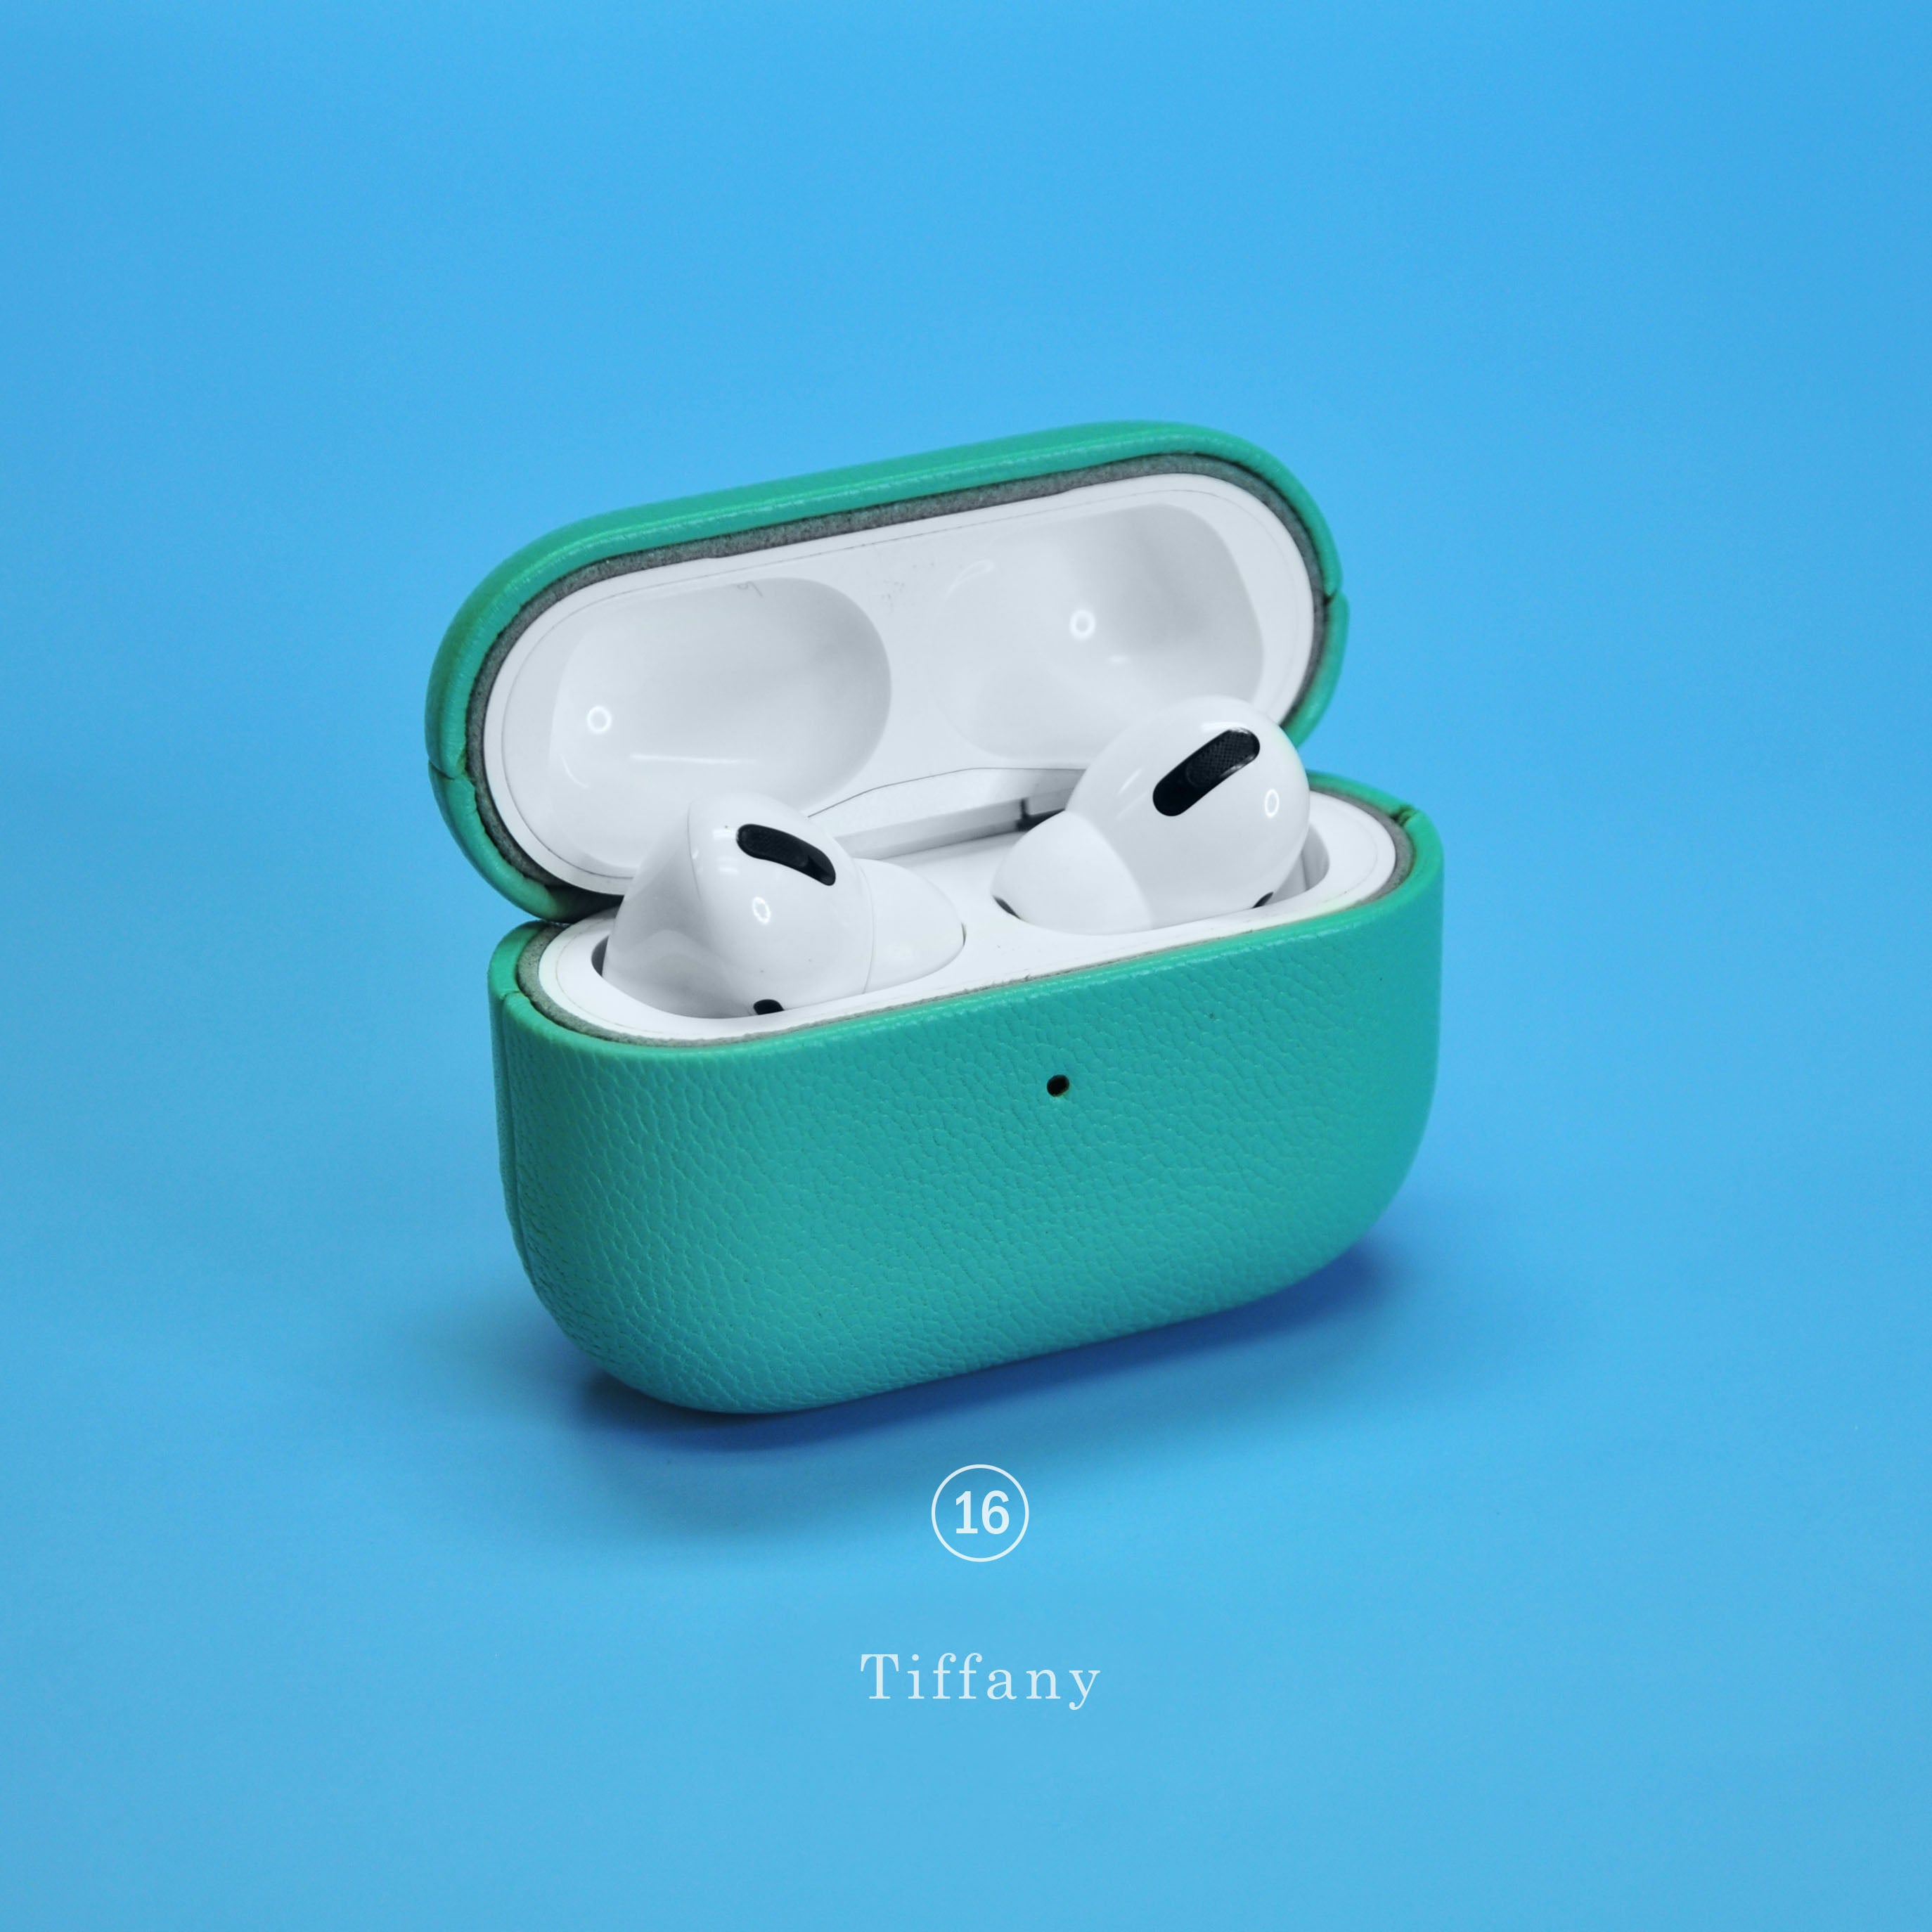 Tiffany Leather AirPod Case